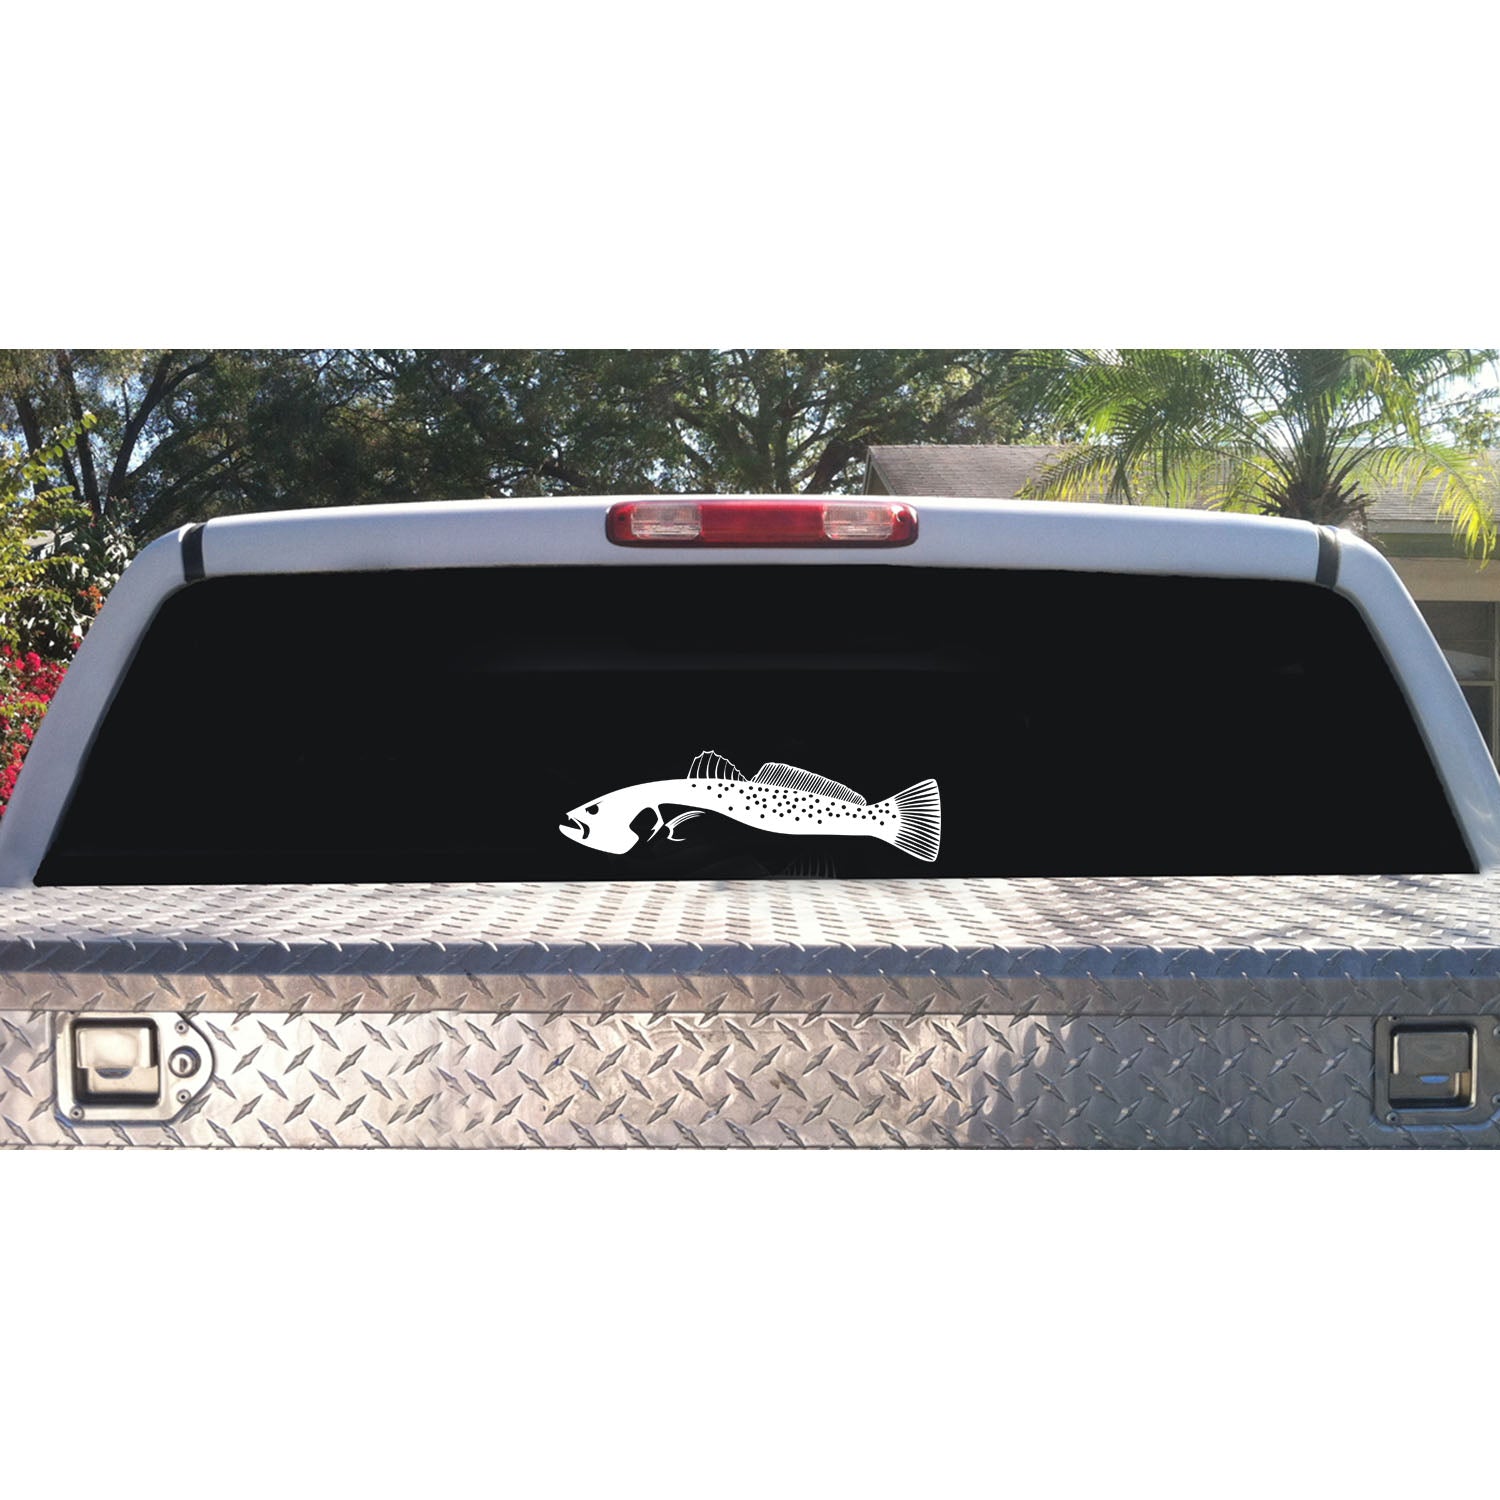 Skiff Life Sea Trout Fishing Stickers - Seatrout UV Protected Car Decals Waterproof Fish Stickers Yeti Decals for Boat Kayak Truck Yeti Tumbler Car Laptop Decor Full Tail - Skiff Life